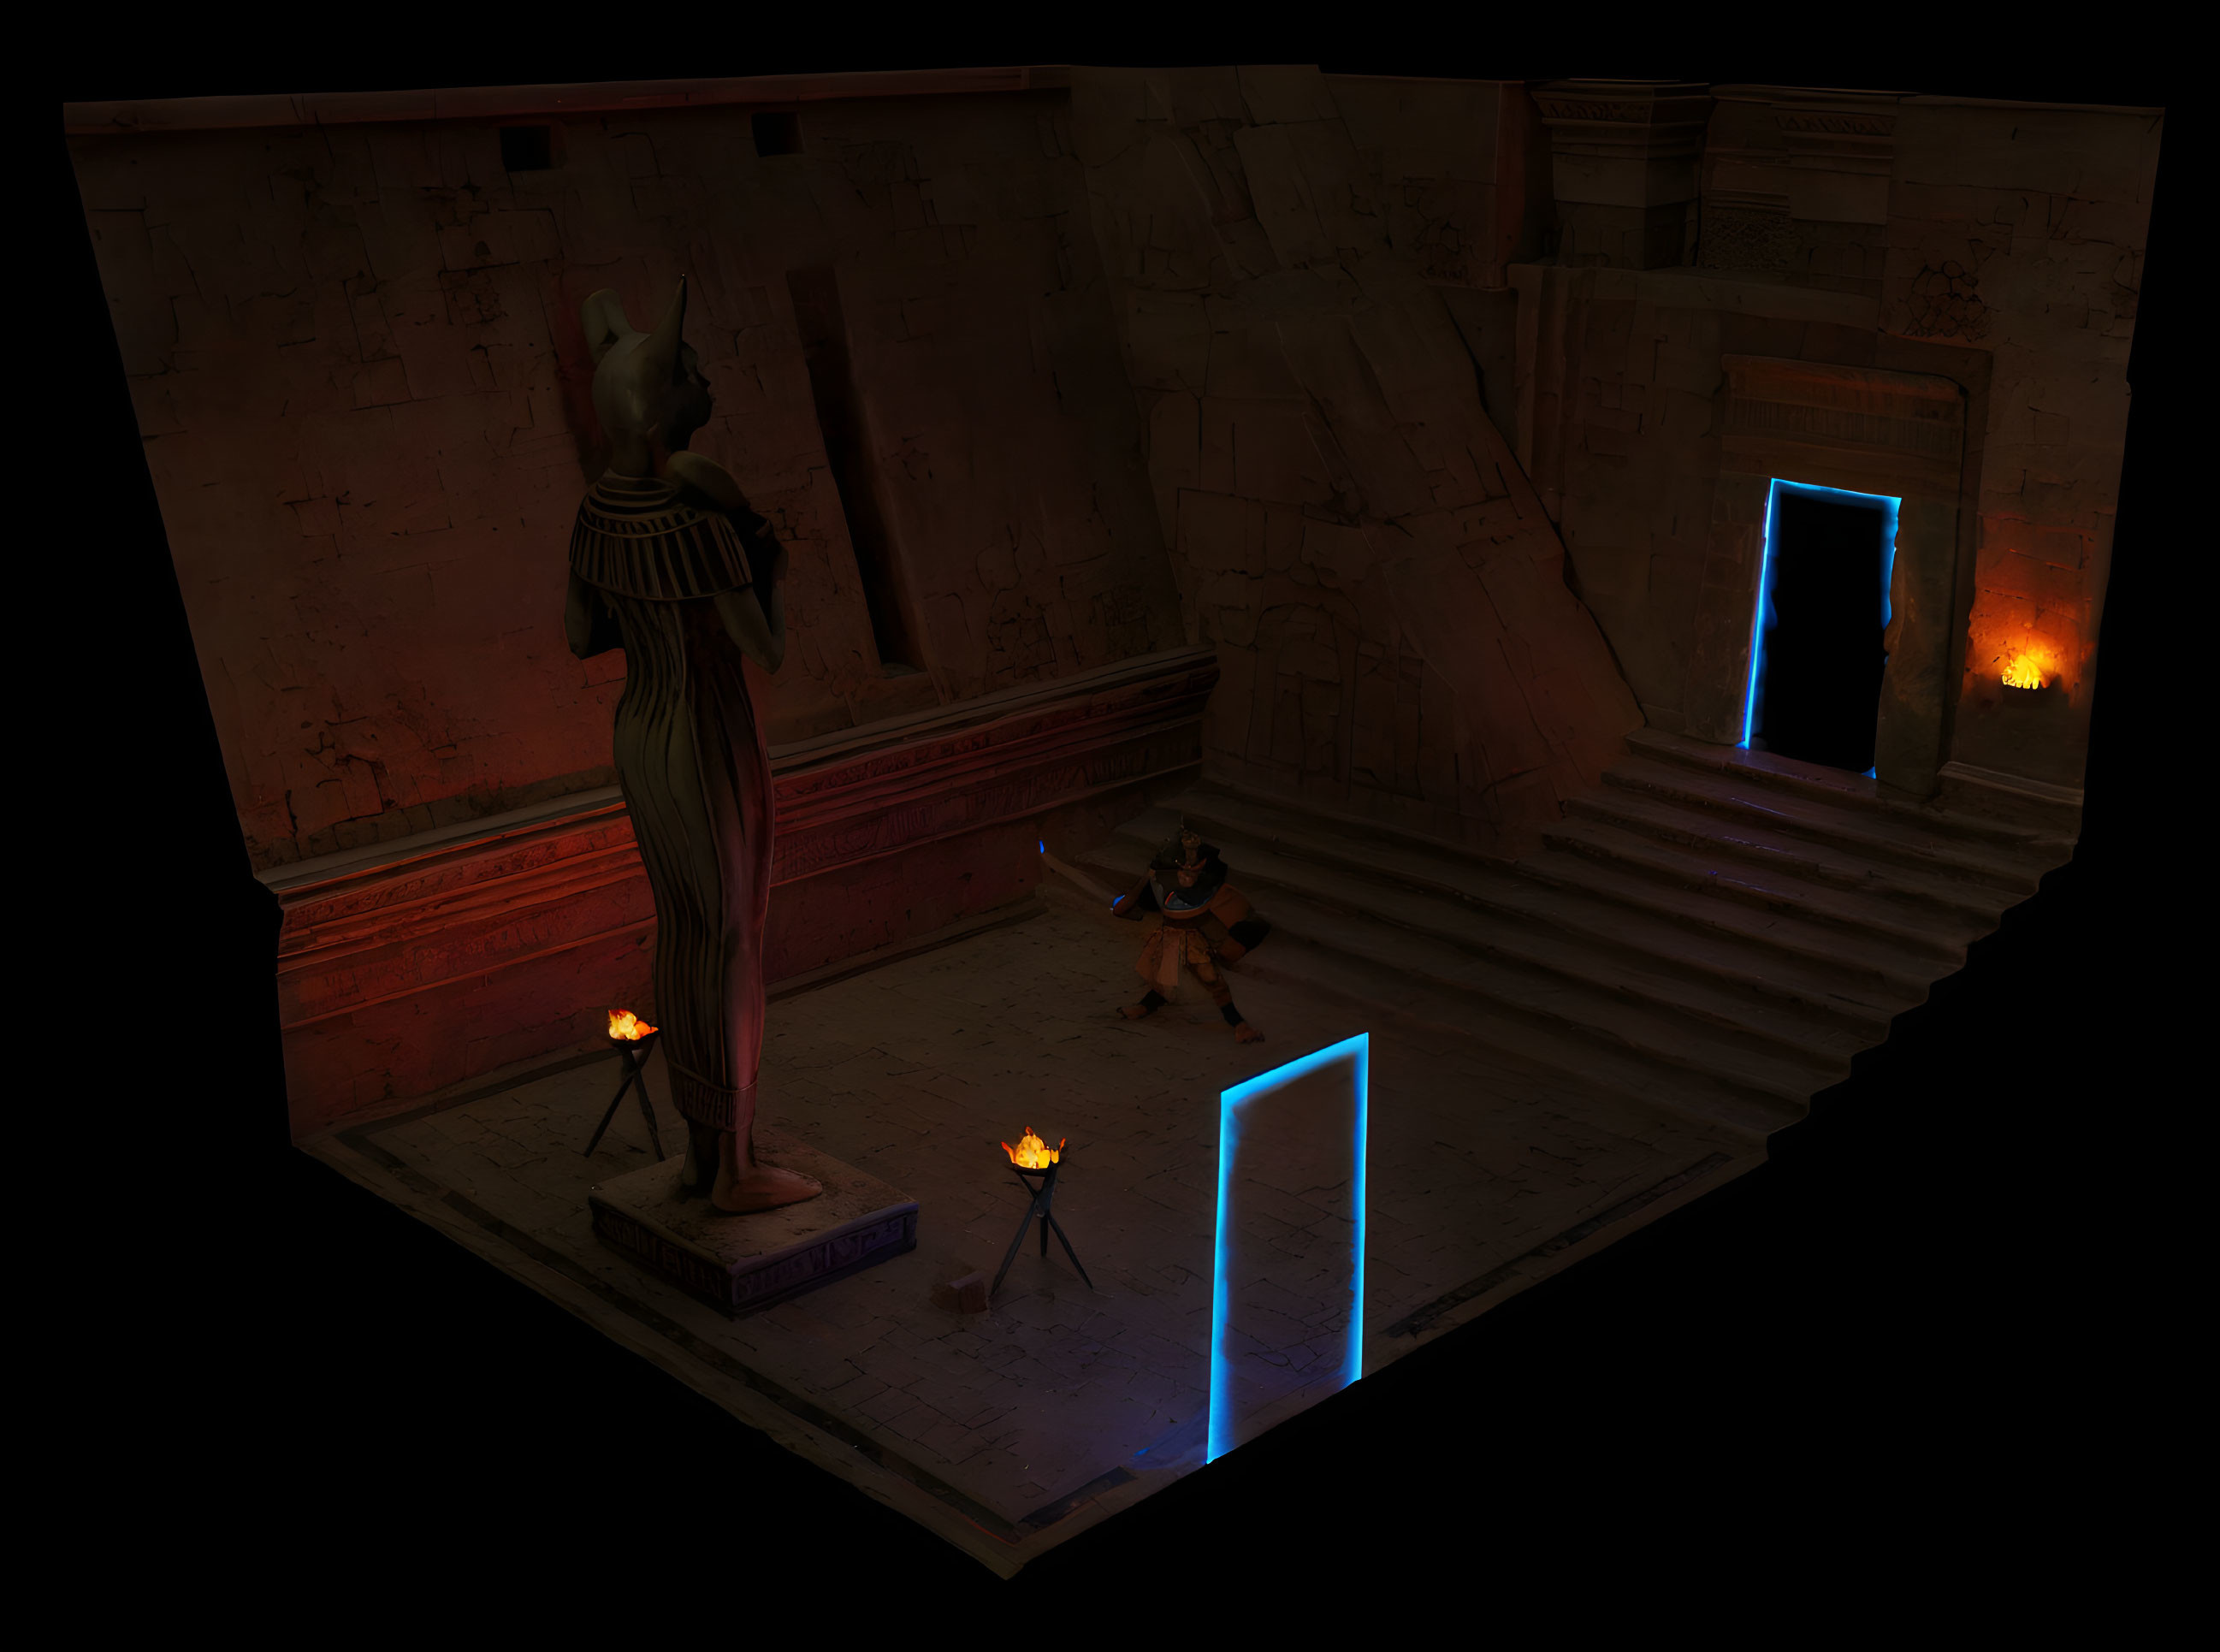 Ancient Egyptian chamber with deity statue, torchlight, and blue portals